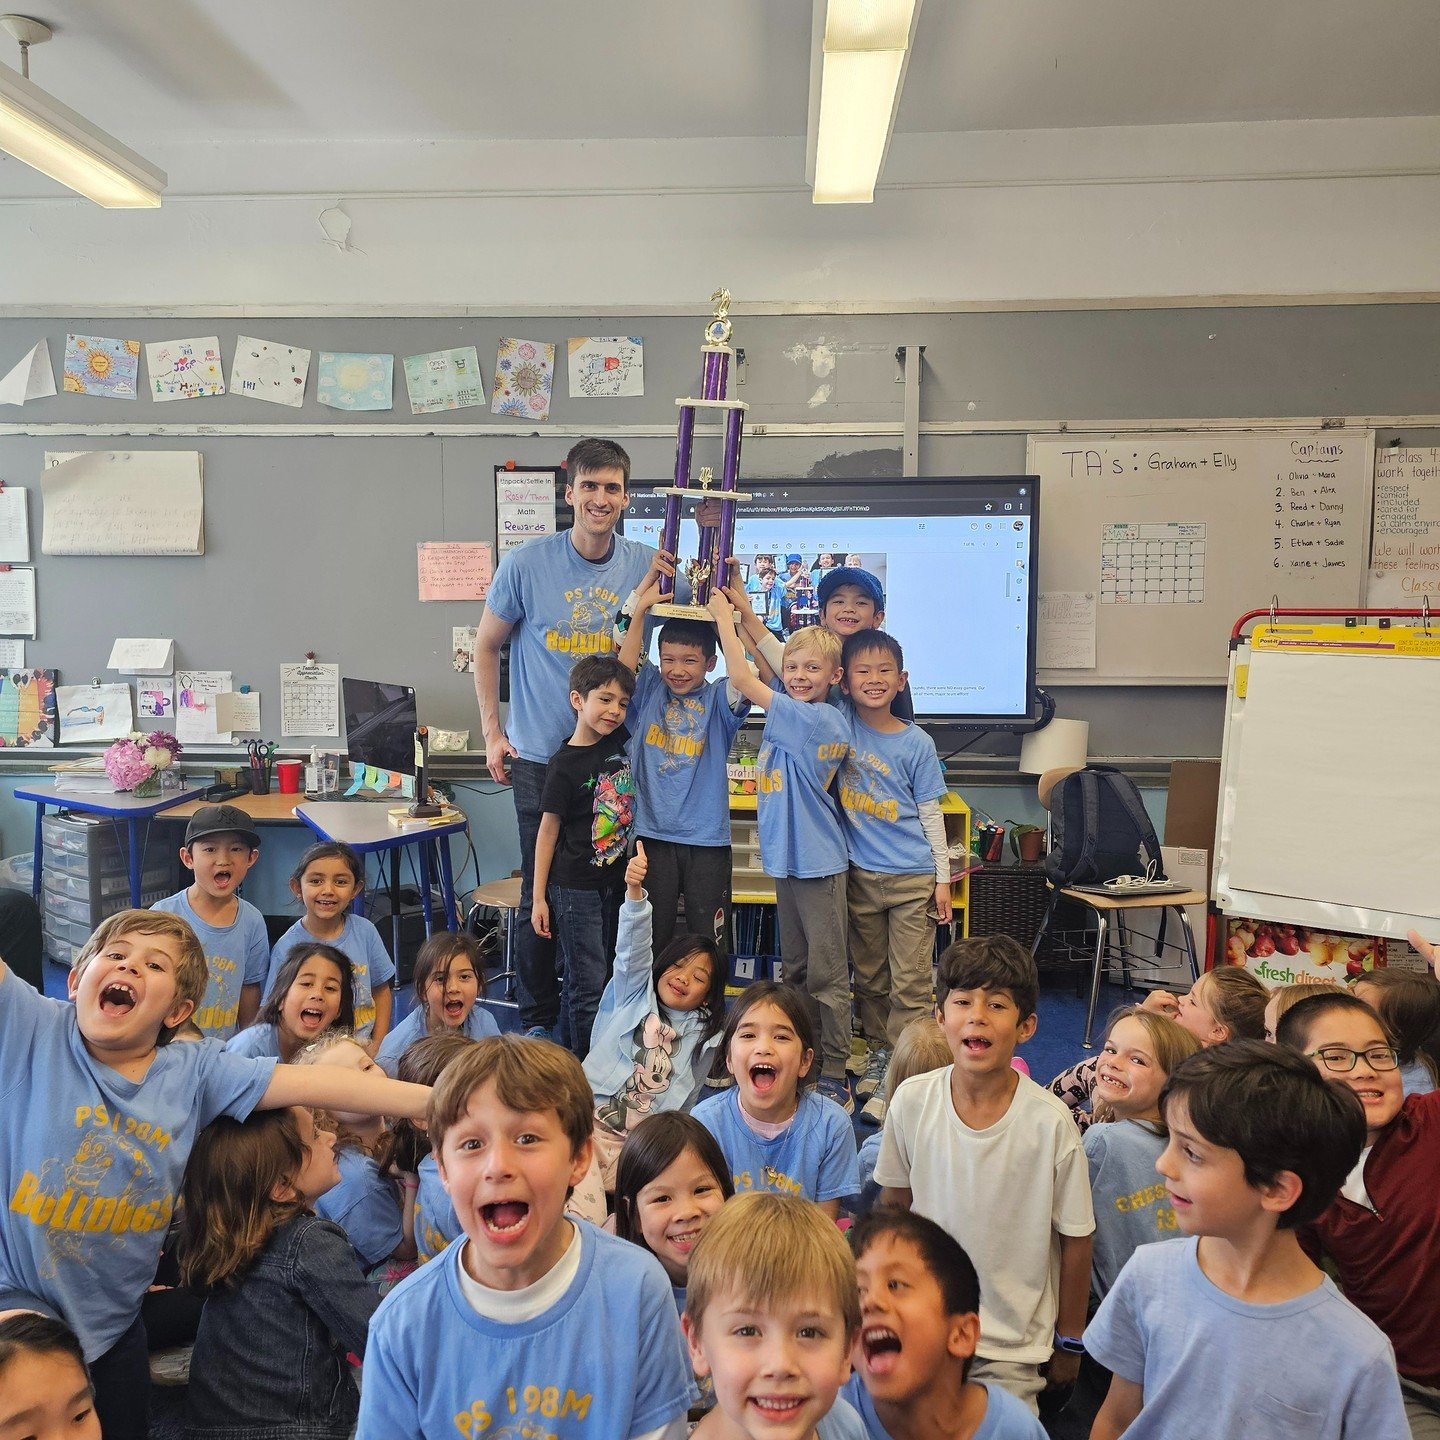 Ain't no party like a Bulldog party! The school spirit here is wild. When some of us win, we all do! PS 198 celebrates its top-5 finish in K-6 U-1400 at Nationals.